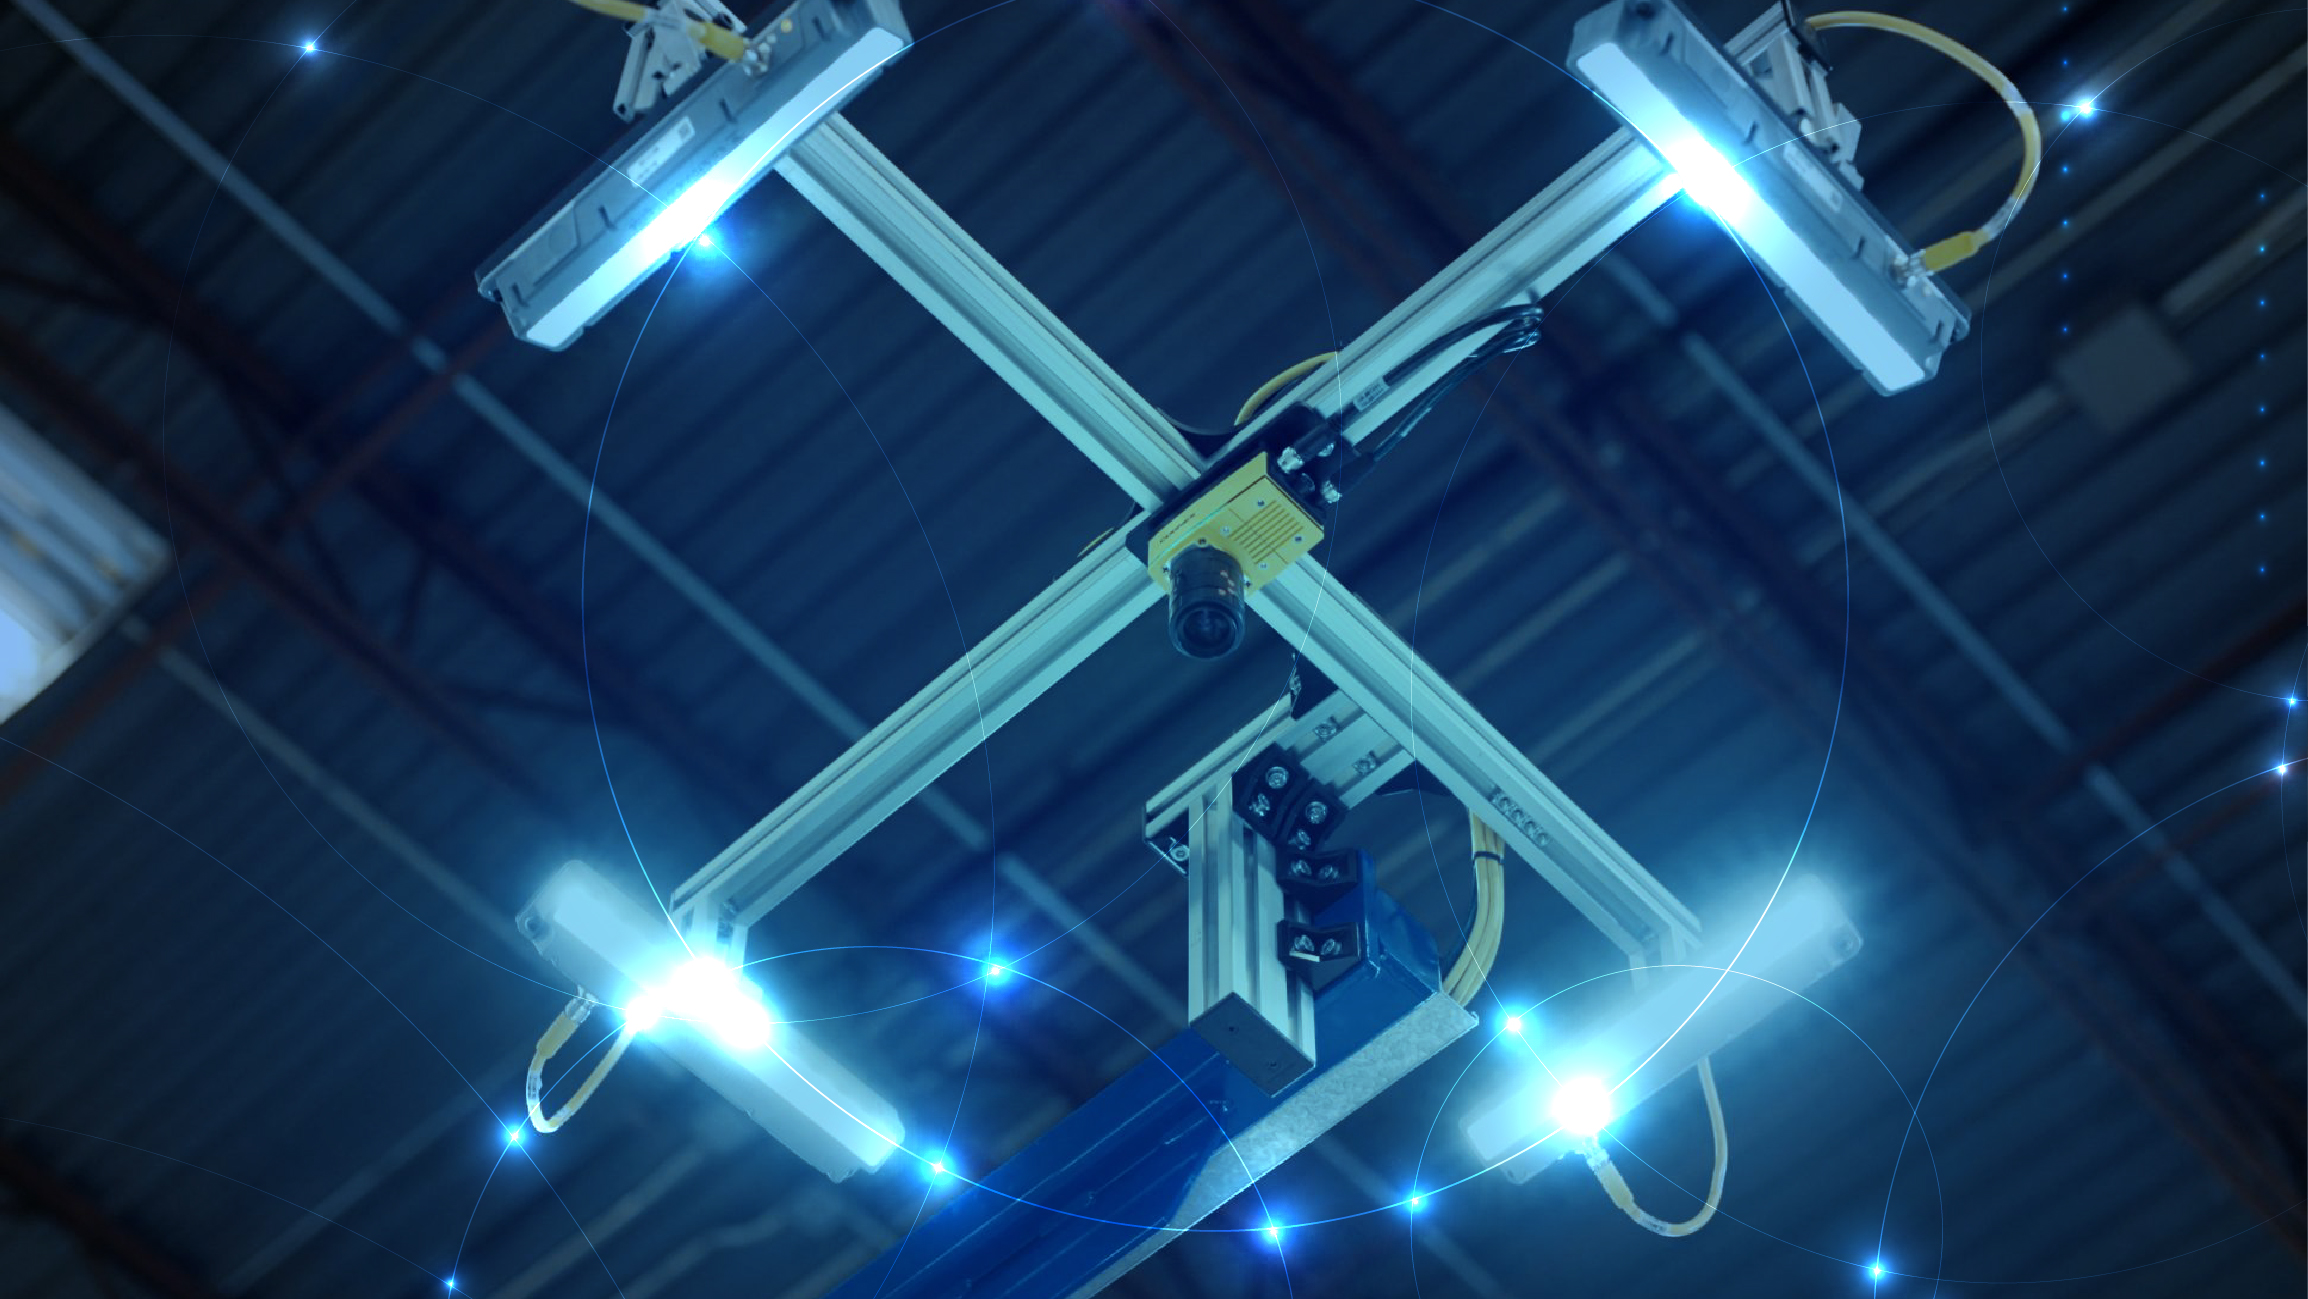 A cobot with vision capabilities hangs above an assembly line.